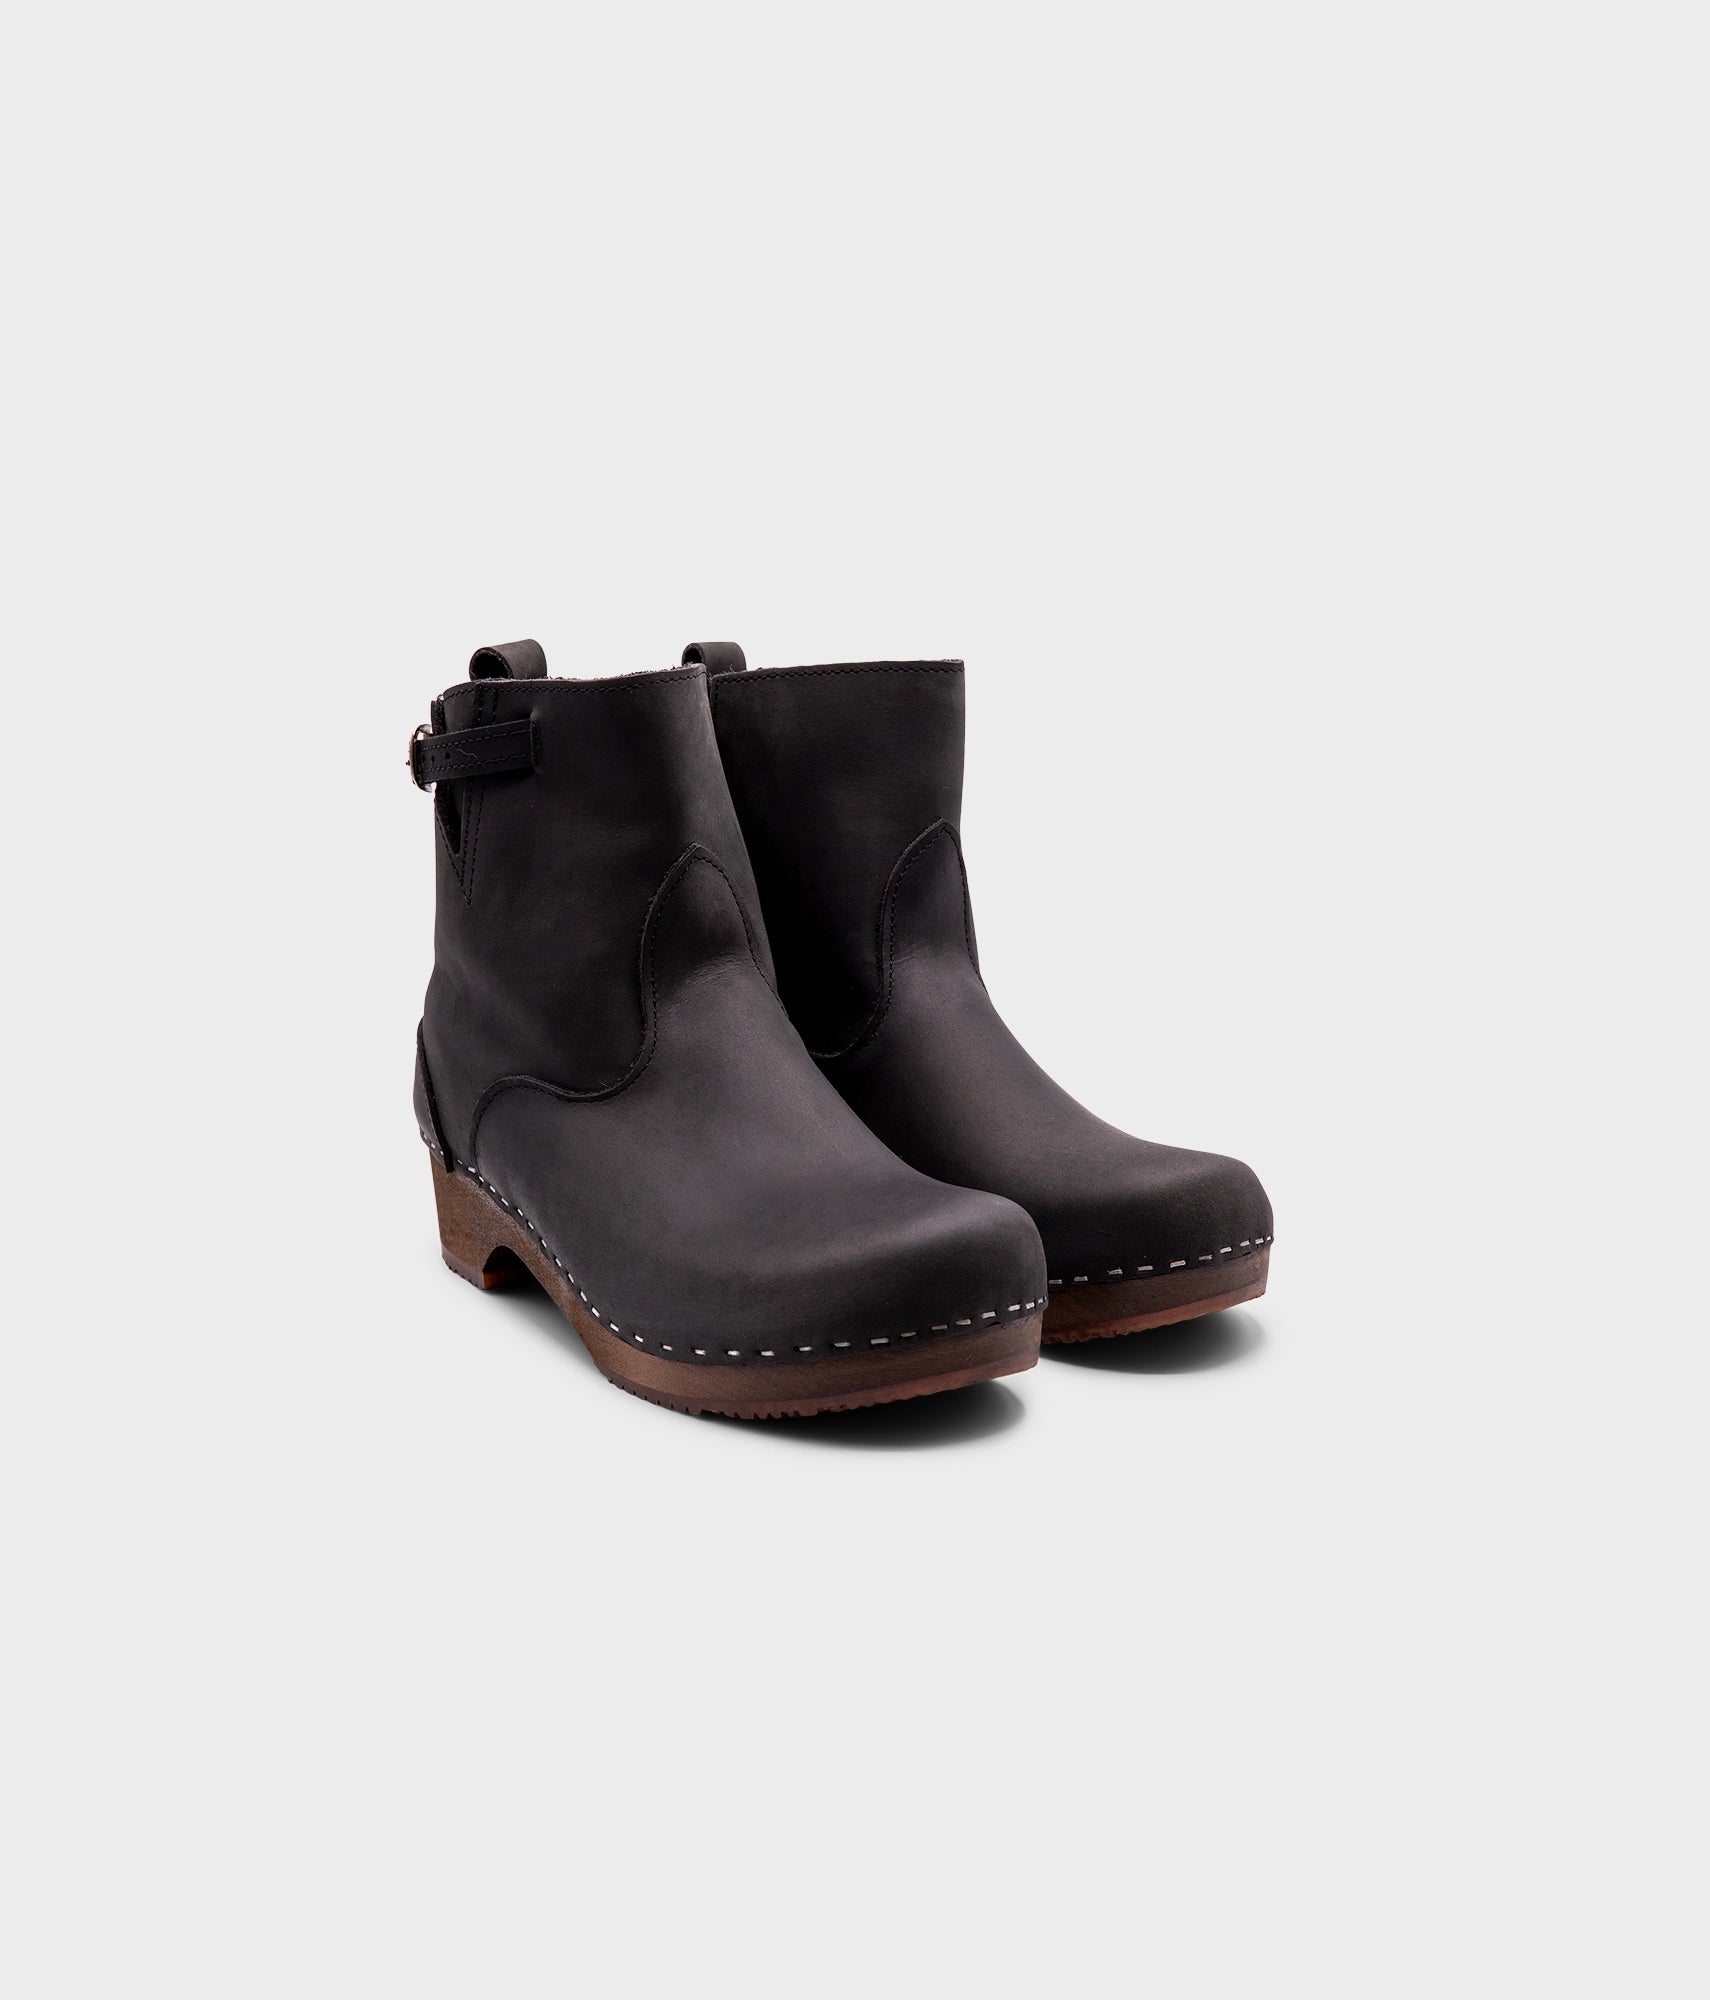 low heeled clog boots in black nubuck leather with a mid-shaft and silver buckle, stapled on a dark wooden base